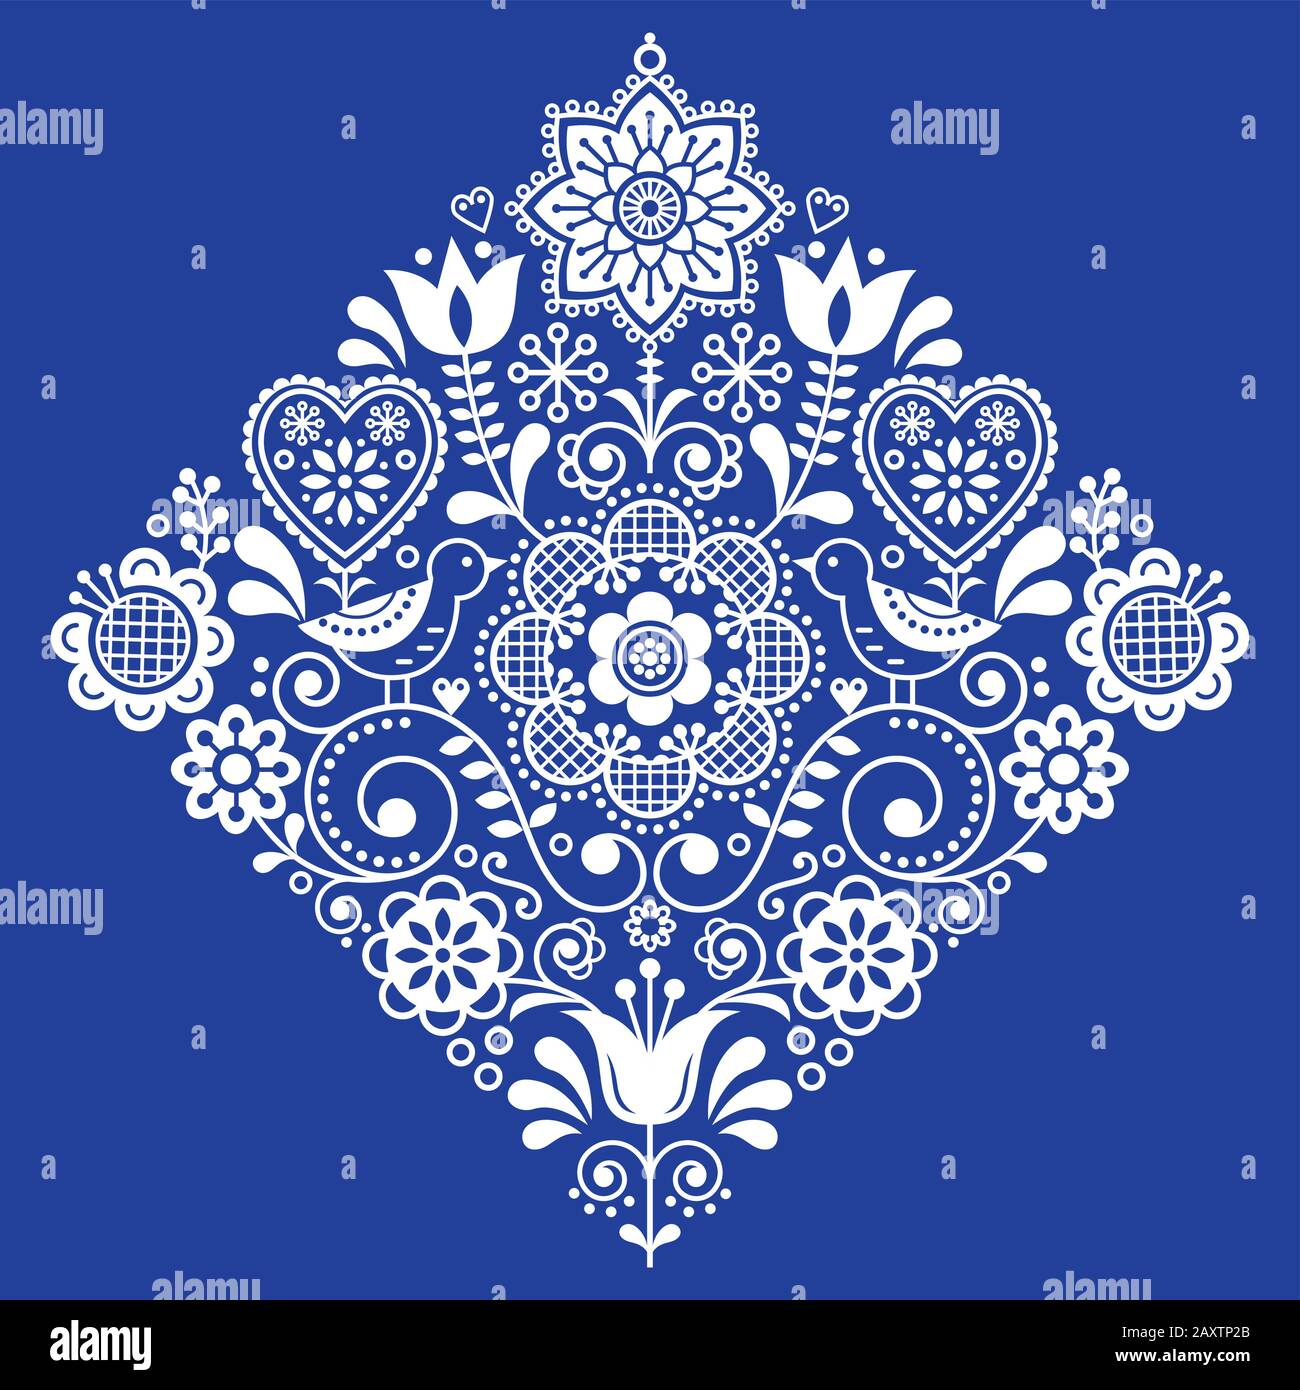 Folk art retro square vector pattern with birds and flowers, Scandinavian white and navy blue symmetric design Stock Vector